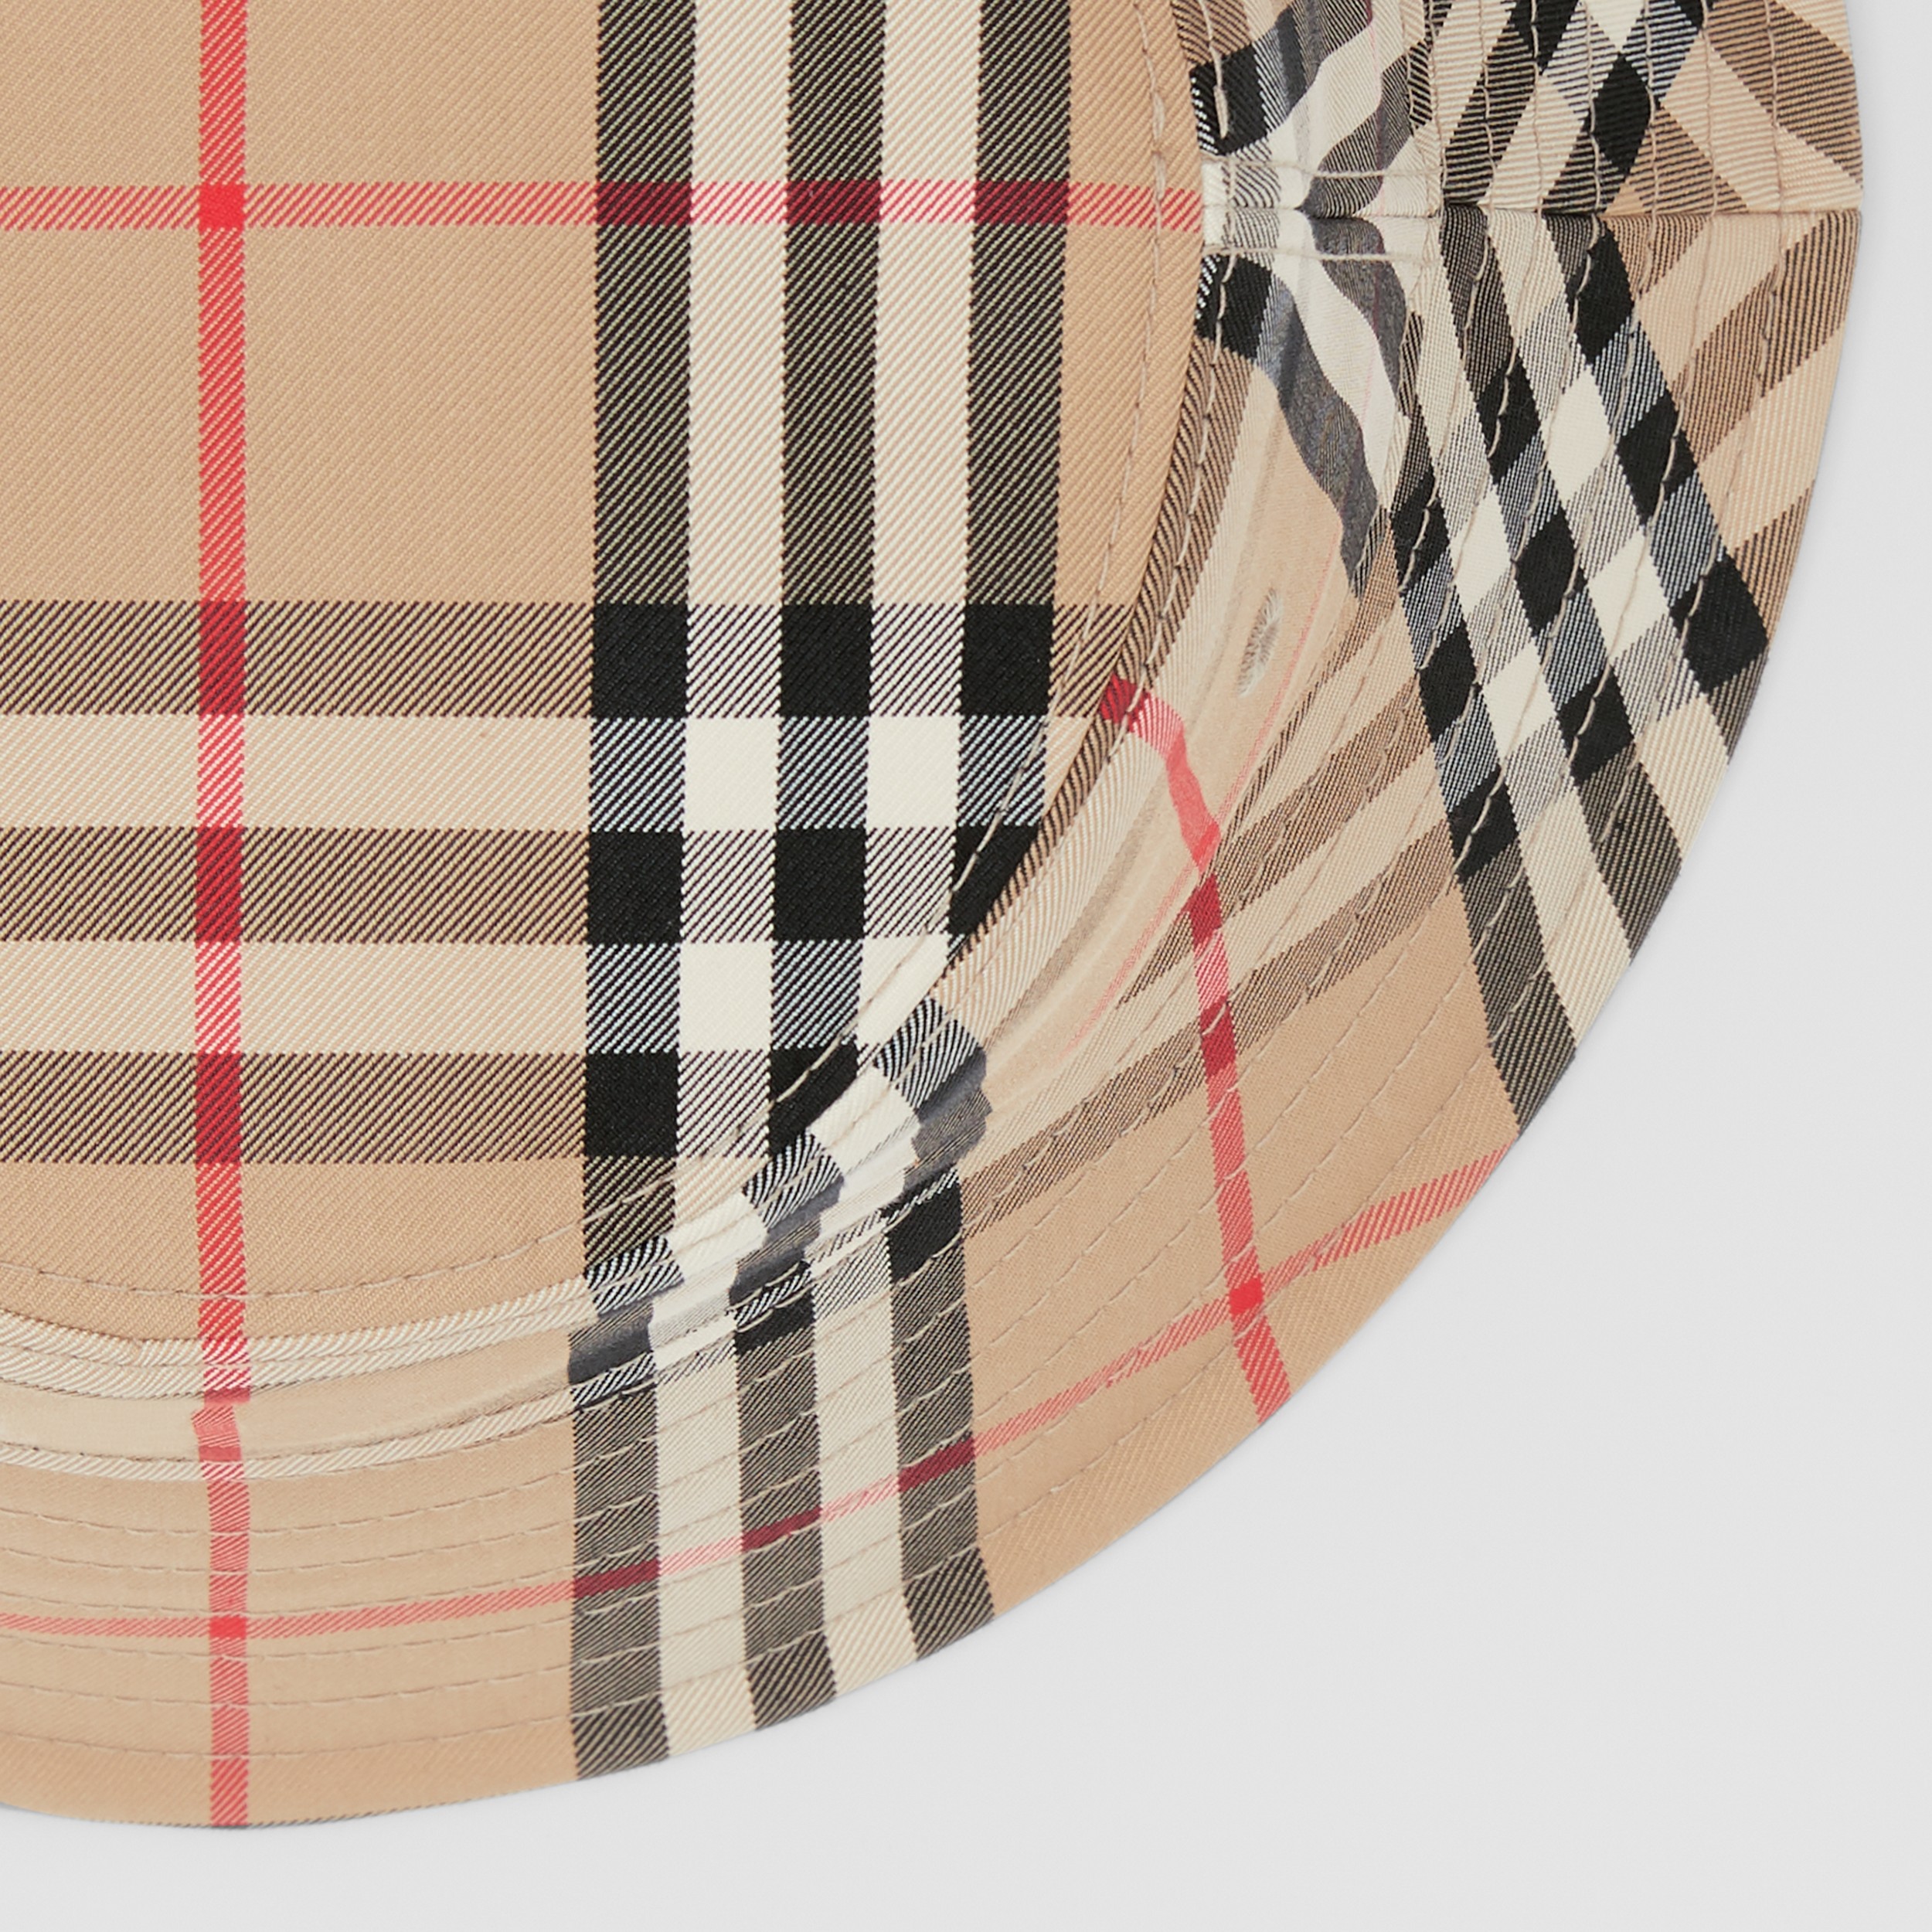 Vintage Check Technical Cotton Bucket Hat in Archive Beige | Burberry® Official - 4